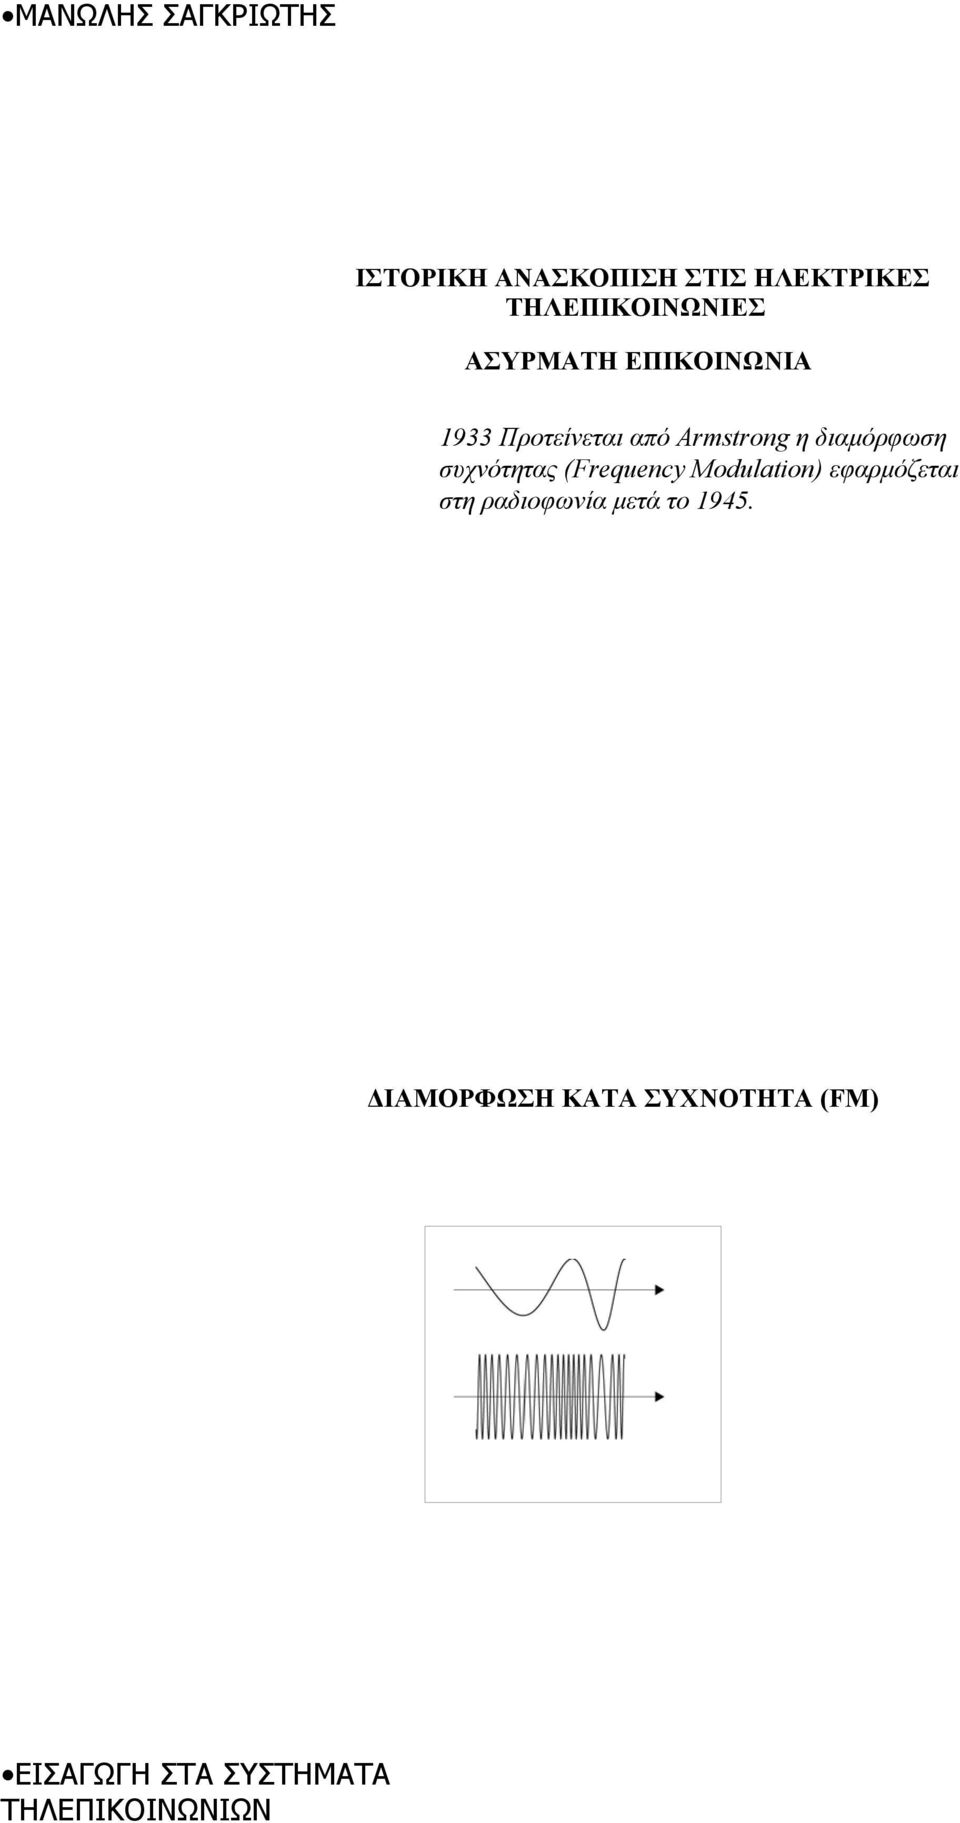 (Frequency Modulation) εφαρµόζεται στη